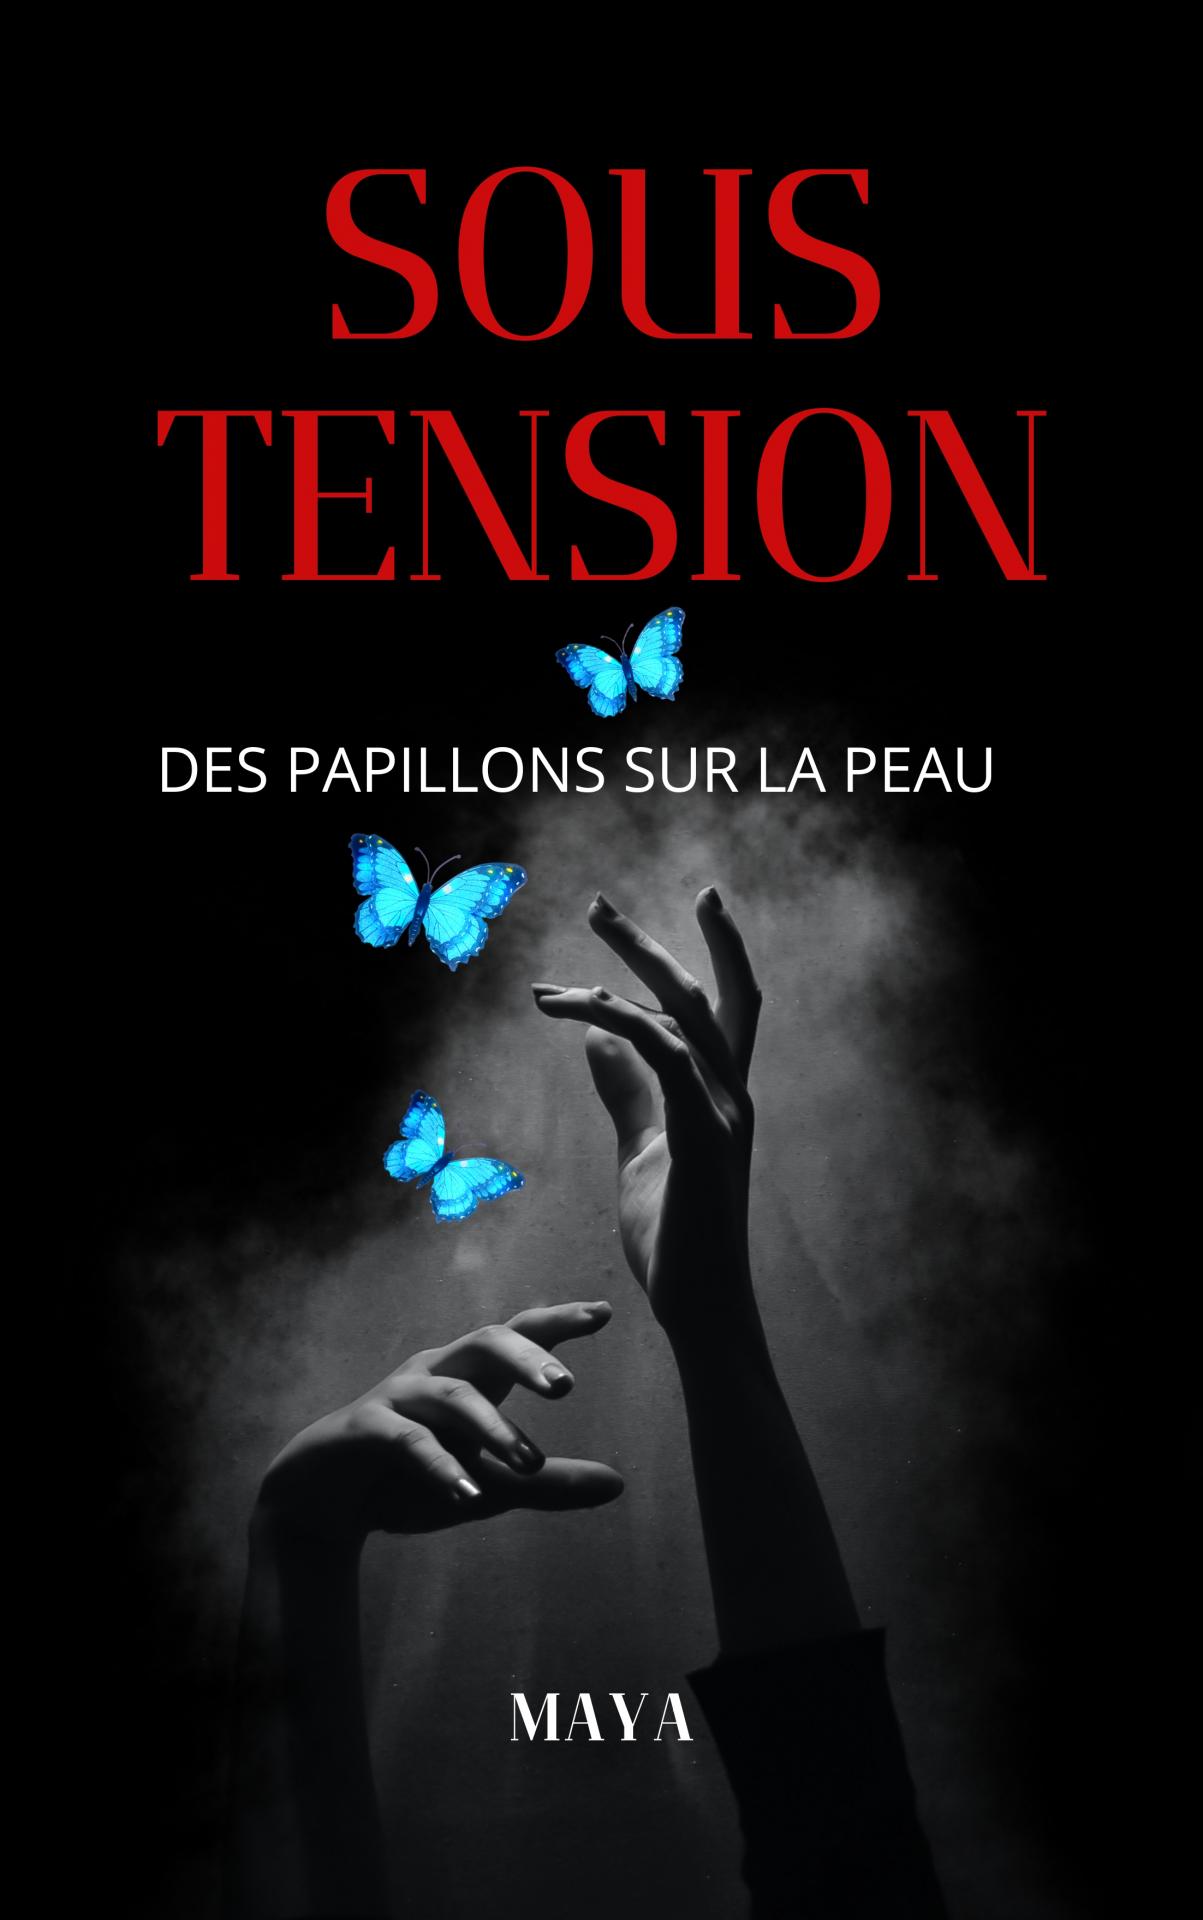 Sous tension page 0001